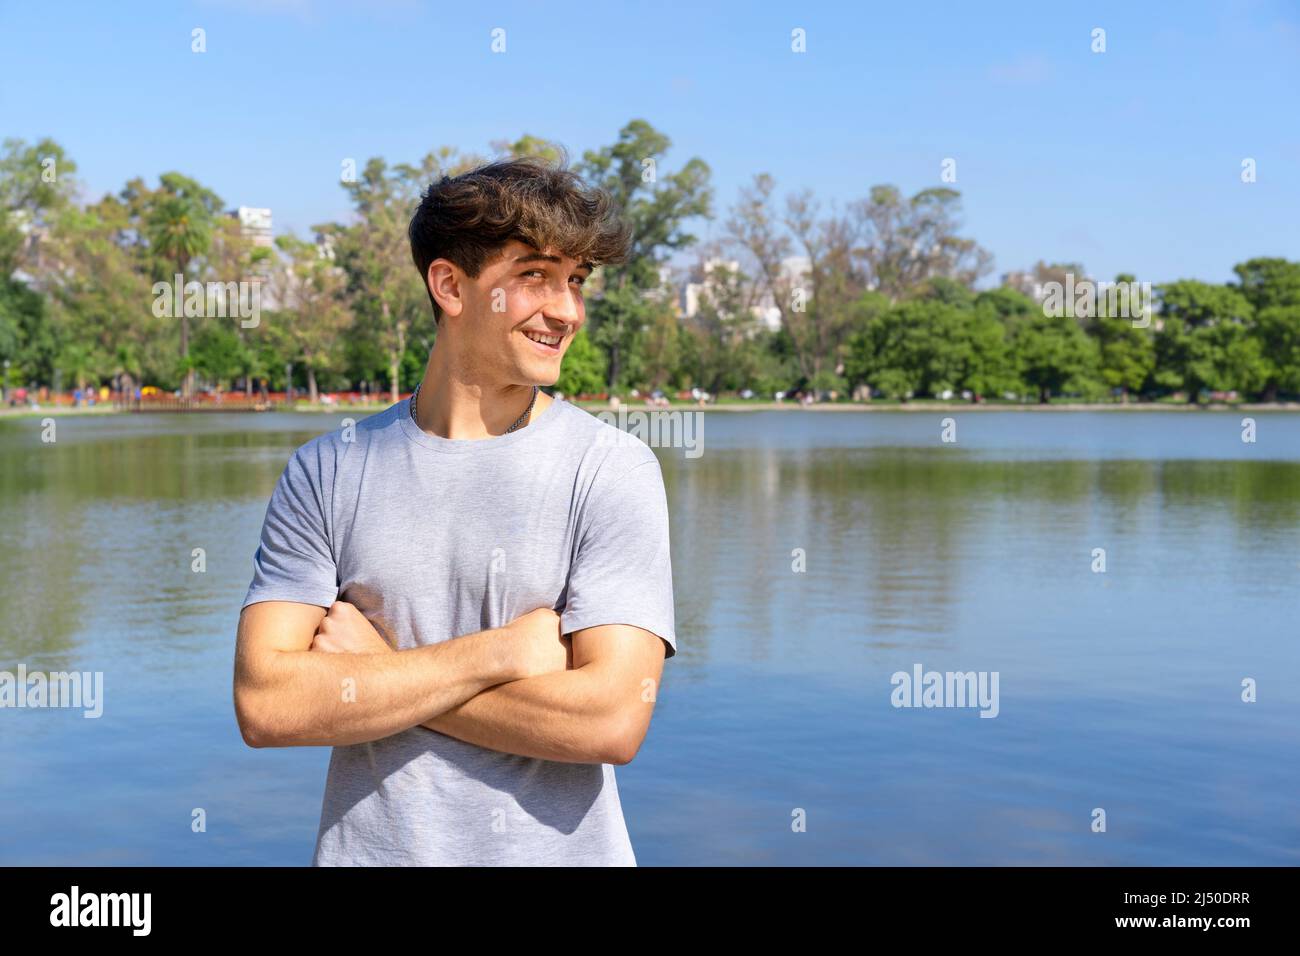 Portrait of confident young blond man with crossed arms looking at camera, summer lake background. Copy space Stock Photo